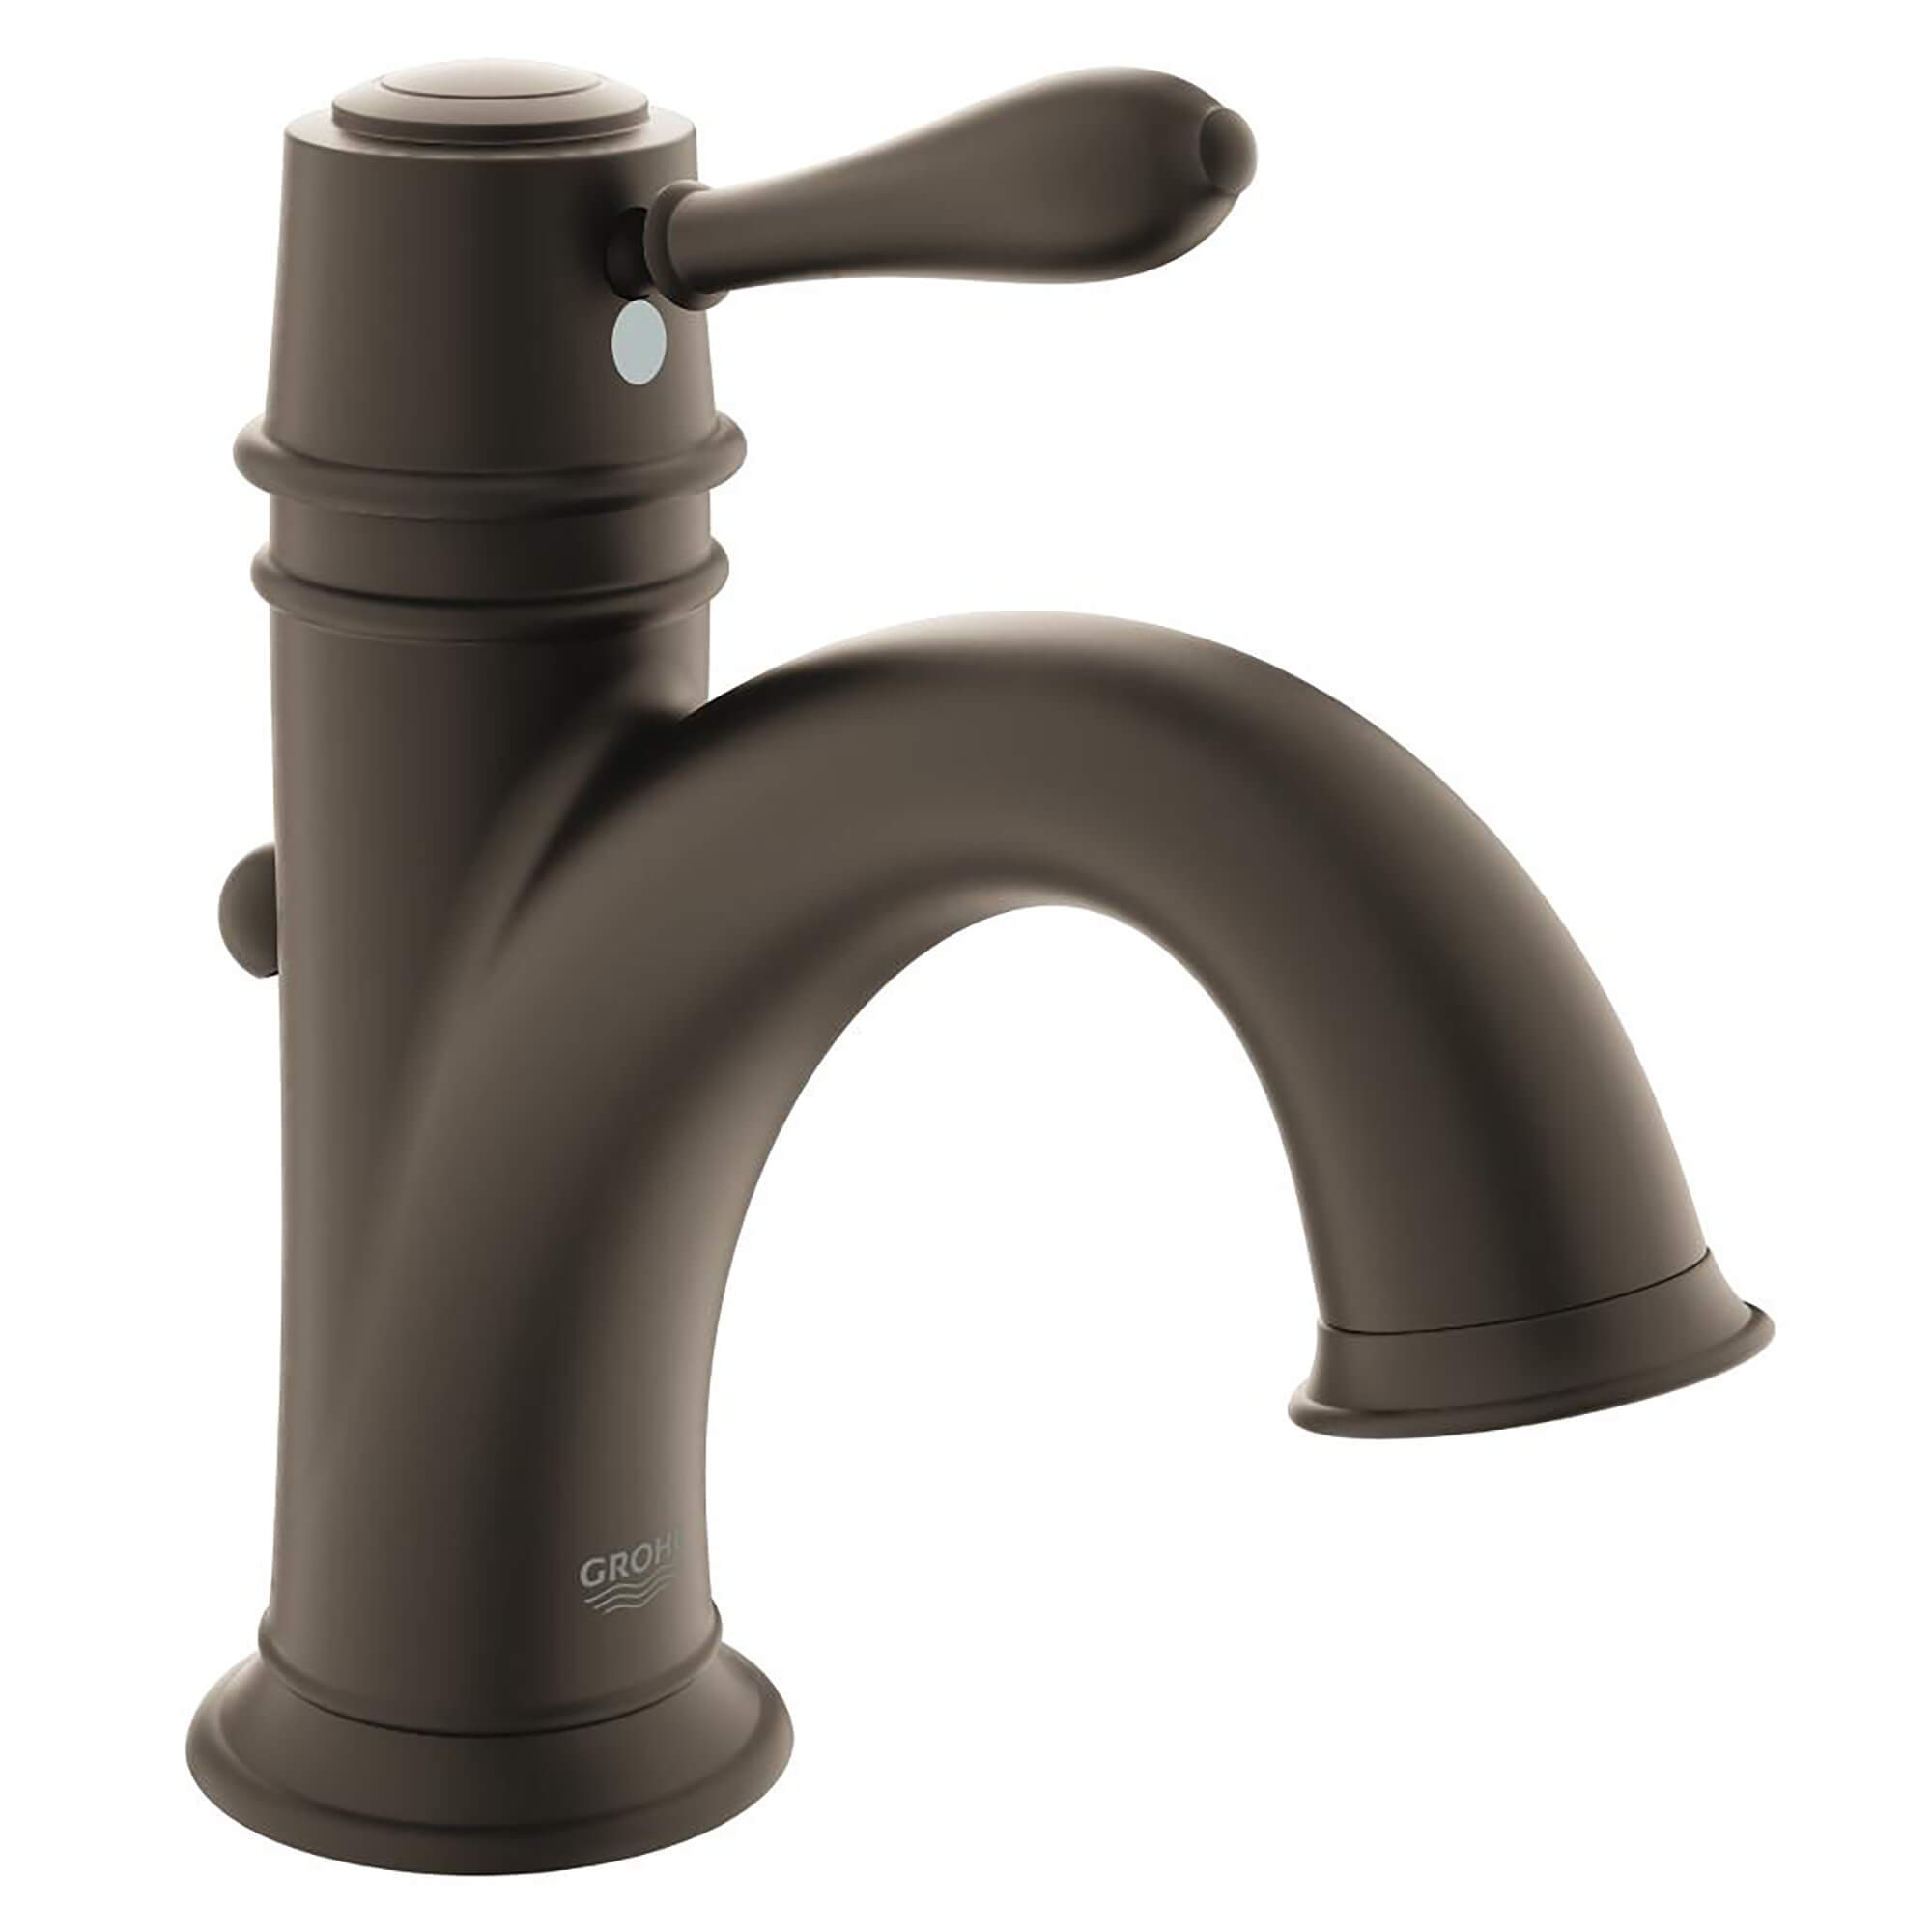 Single Hole Single Handle S Size Bathroom Faucet 12 GPM GROHE OIL RUBBED BRONZE